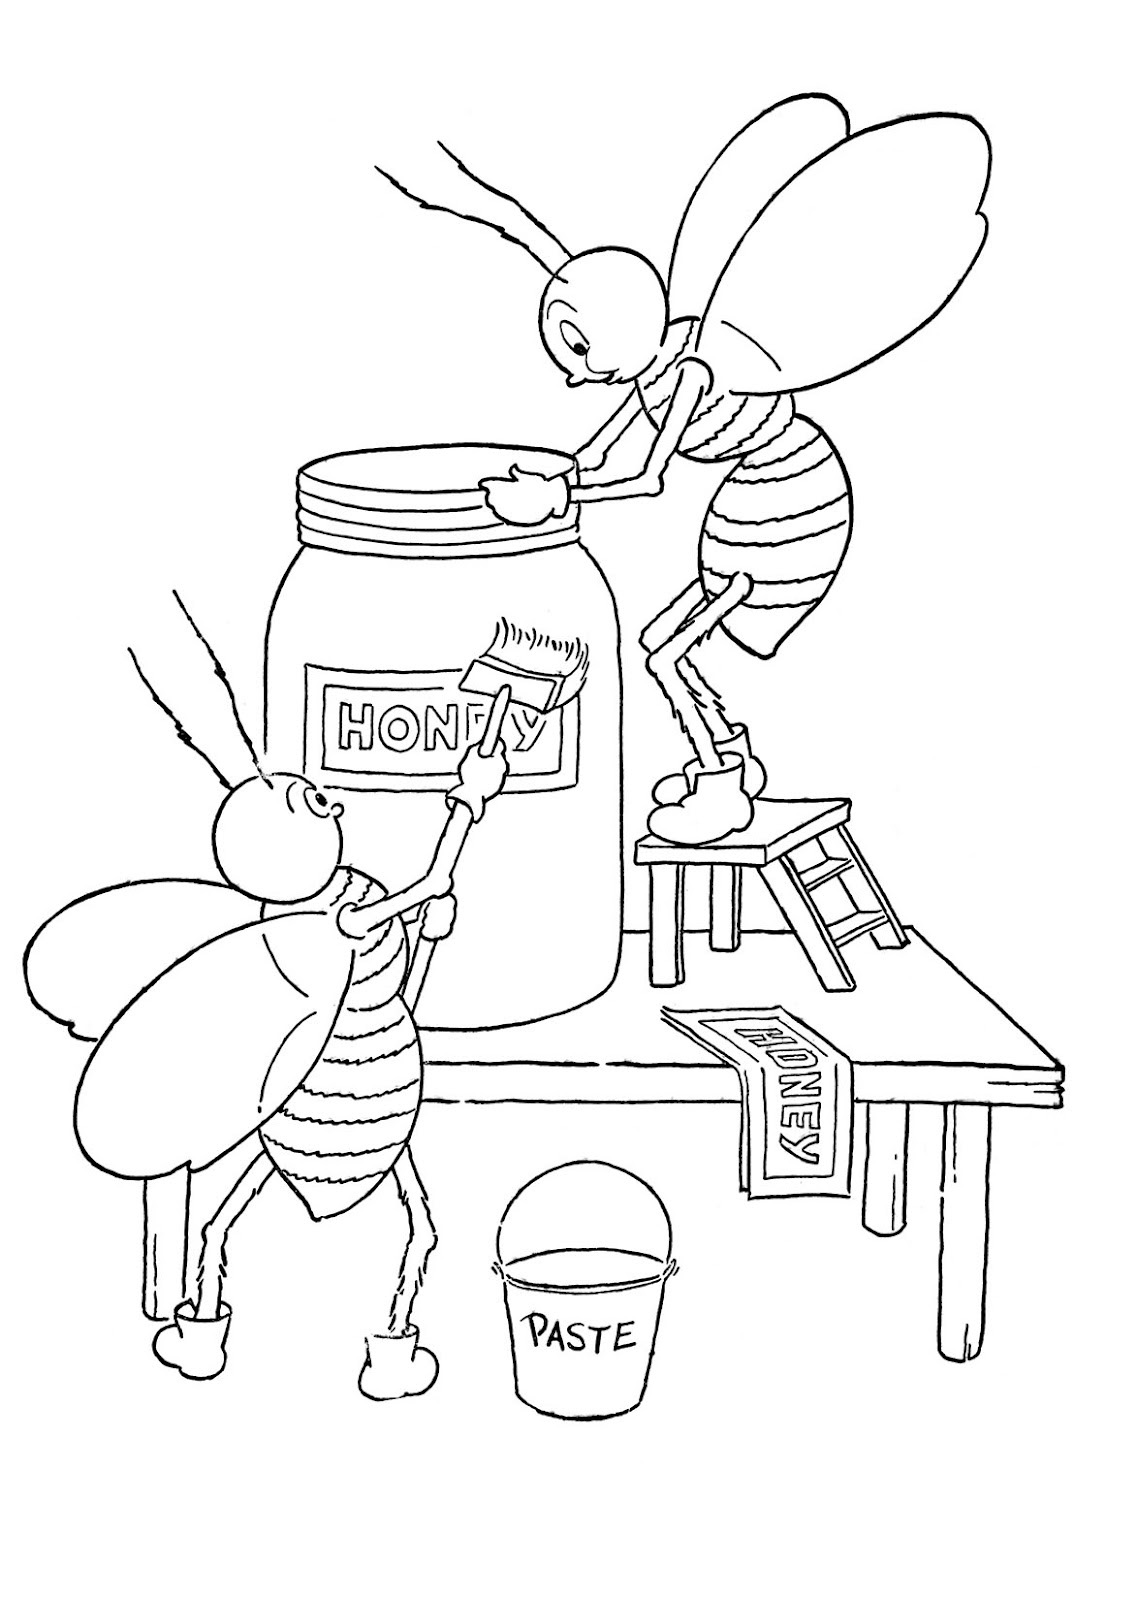 Honey Bee Coloring Page   The Graphics Fairy